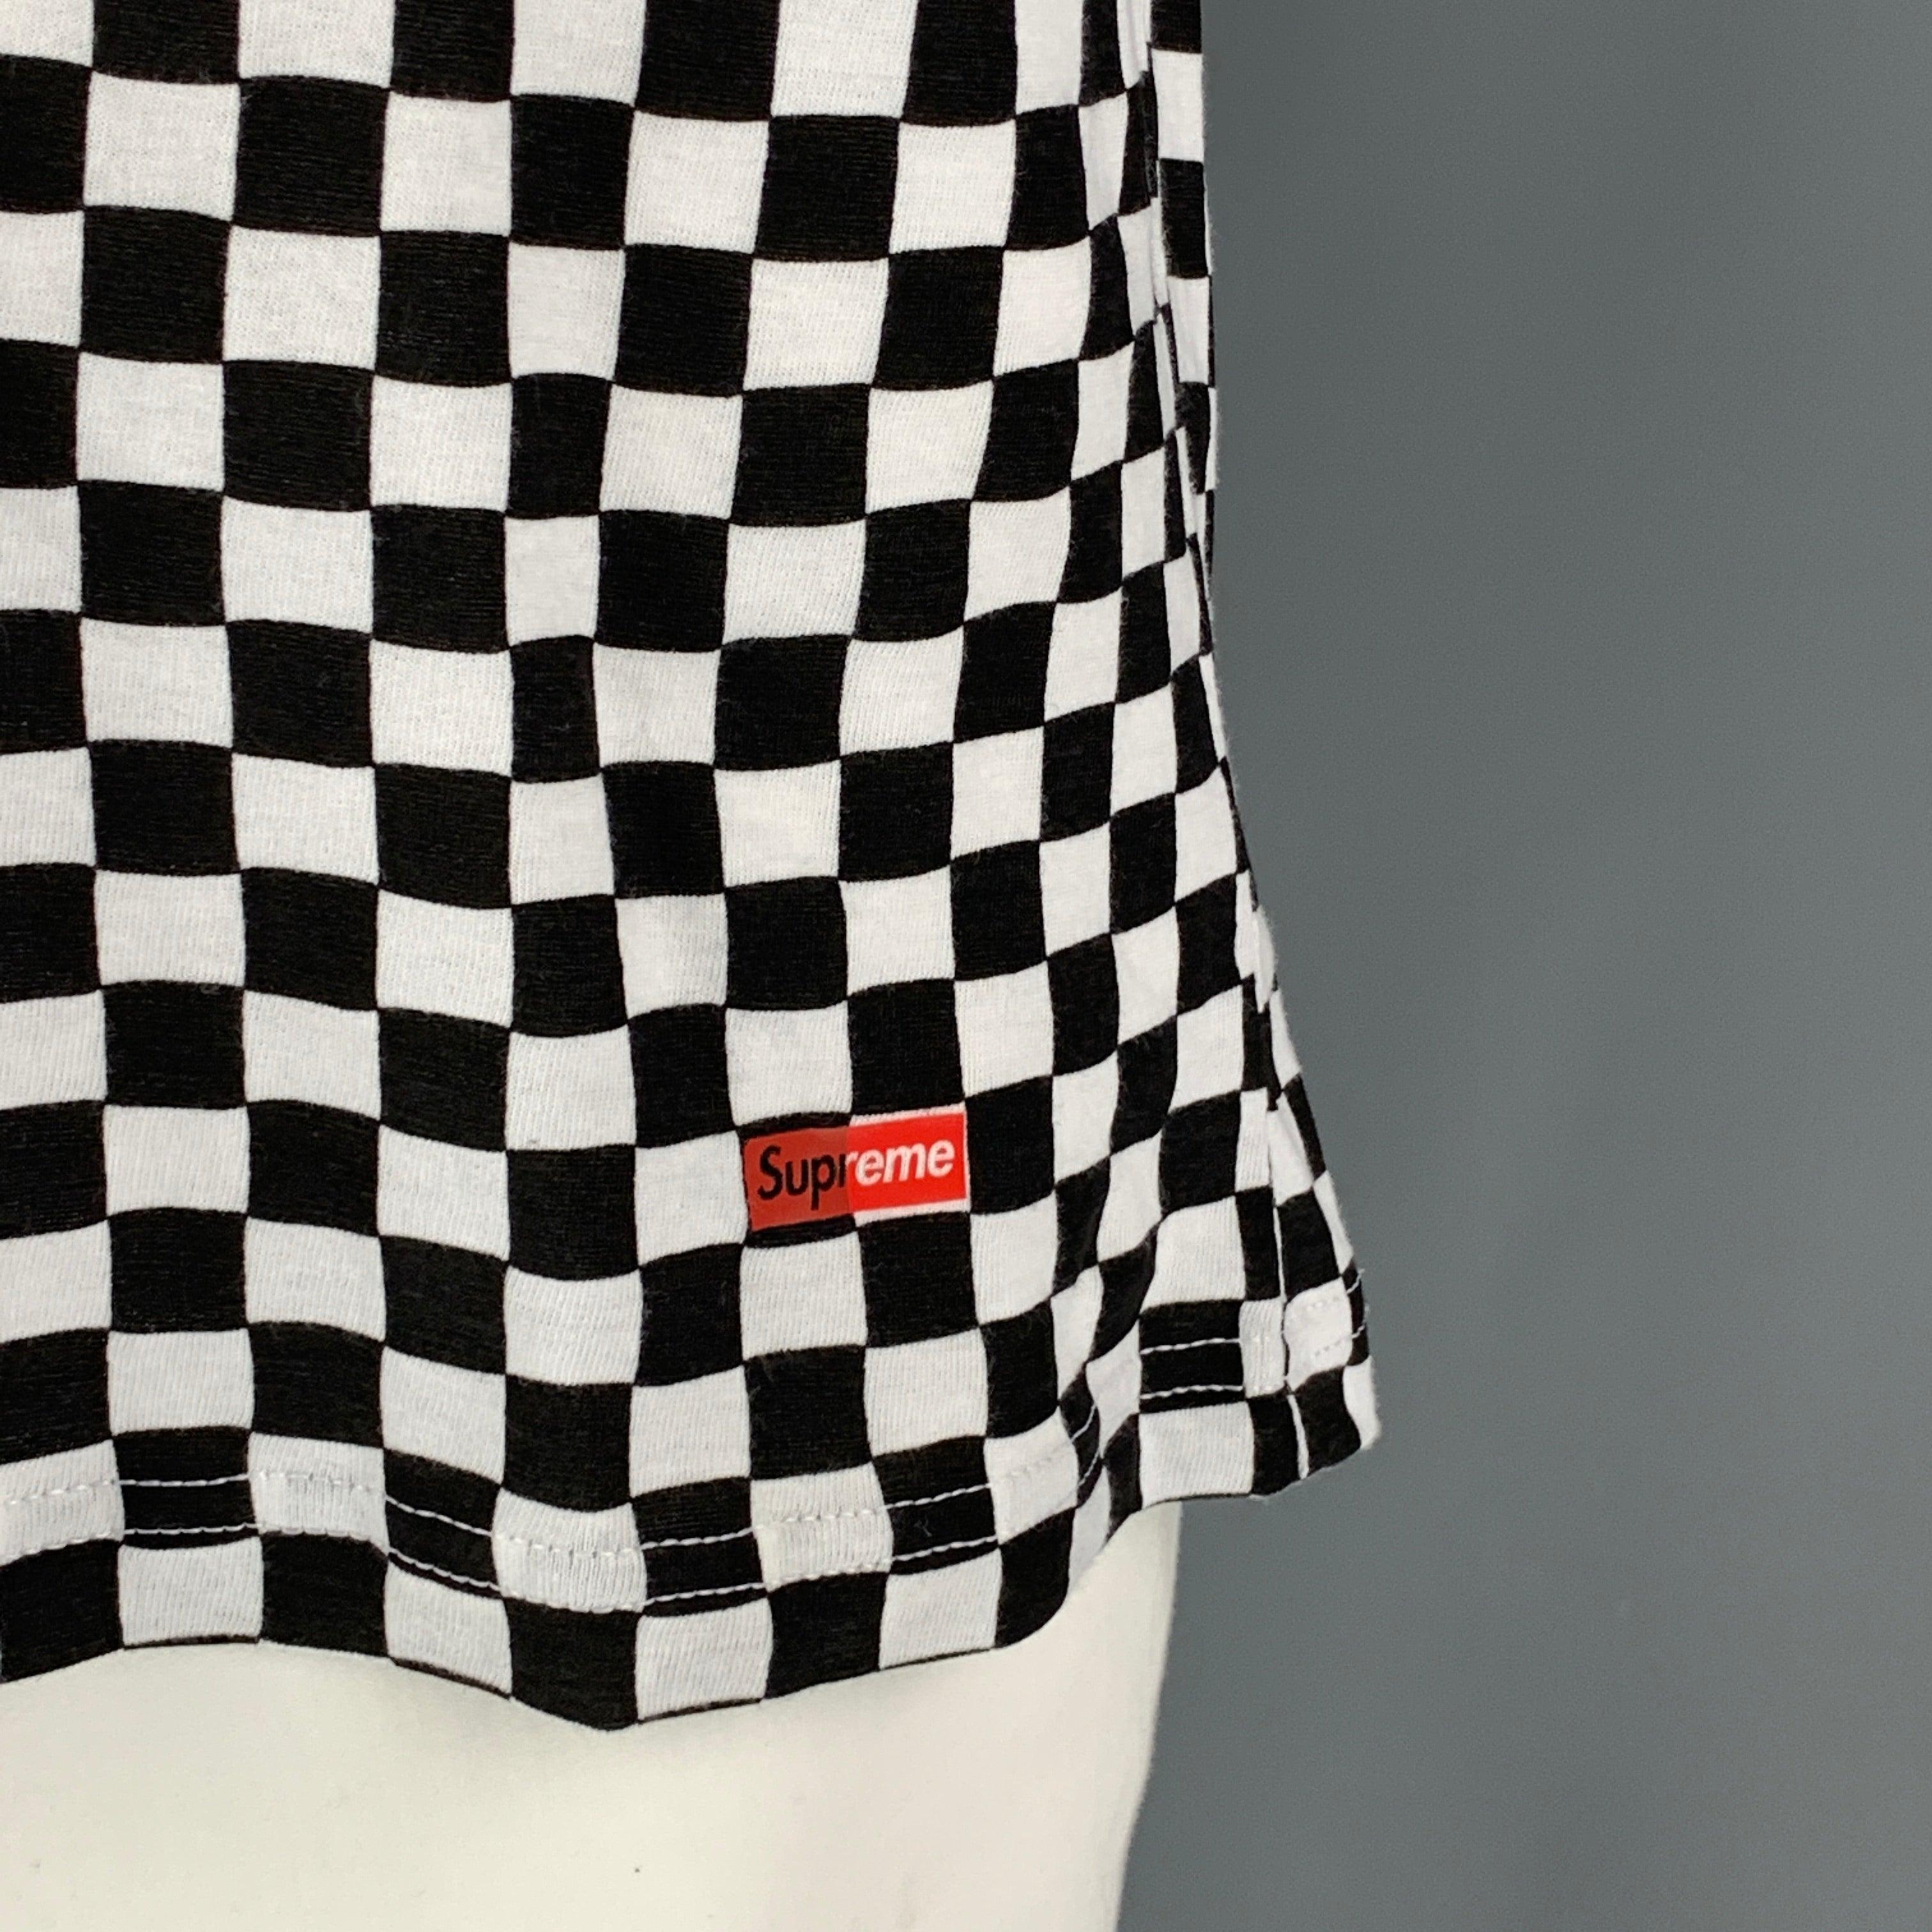 SUPREME x HANES t-shirt comes in a black & white checkered cotton featuring a small logo detail and a crew-neck.
Excellent
Pre-Owned Condition. 

Marked:   L  

Measurements: 
 
Shoulder: 21.5 inches Chest: 44 inches Sleeve: 8 inches Length: 29.5